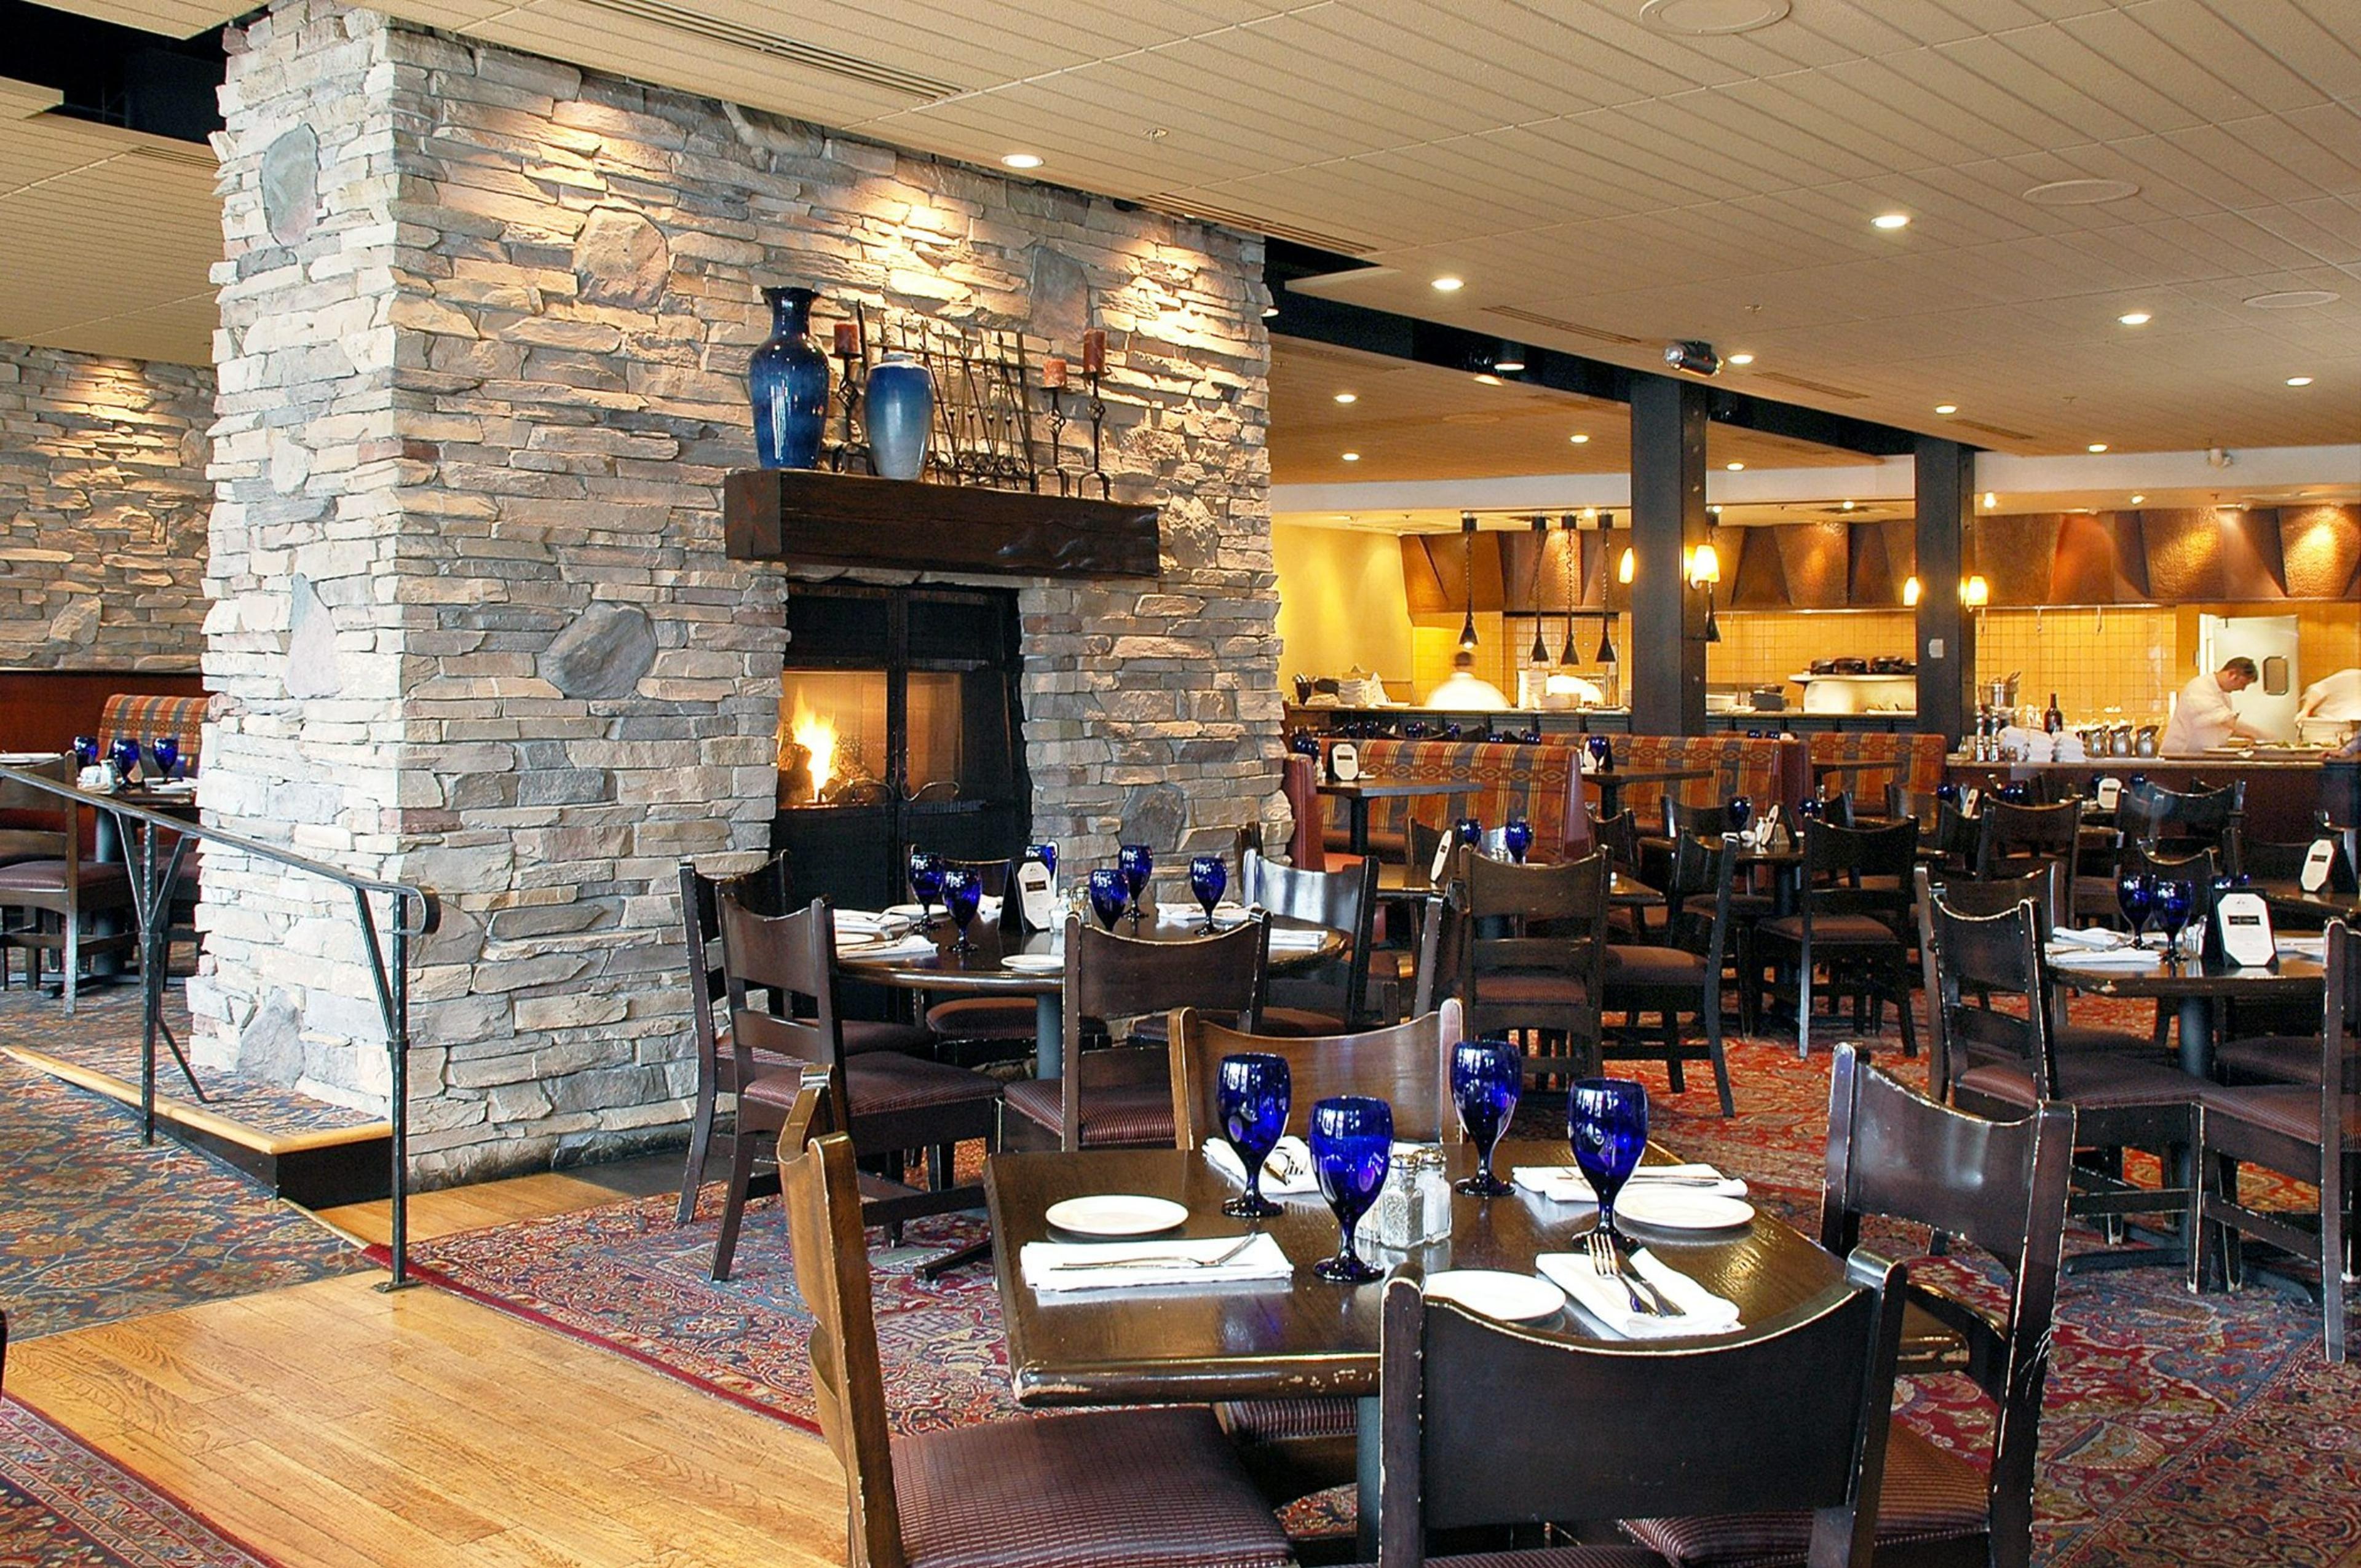 Downtowner Woodfire Grill